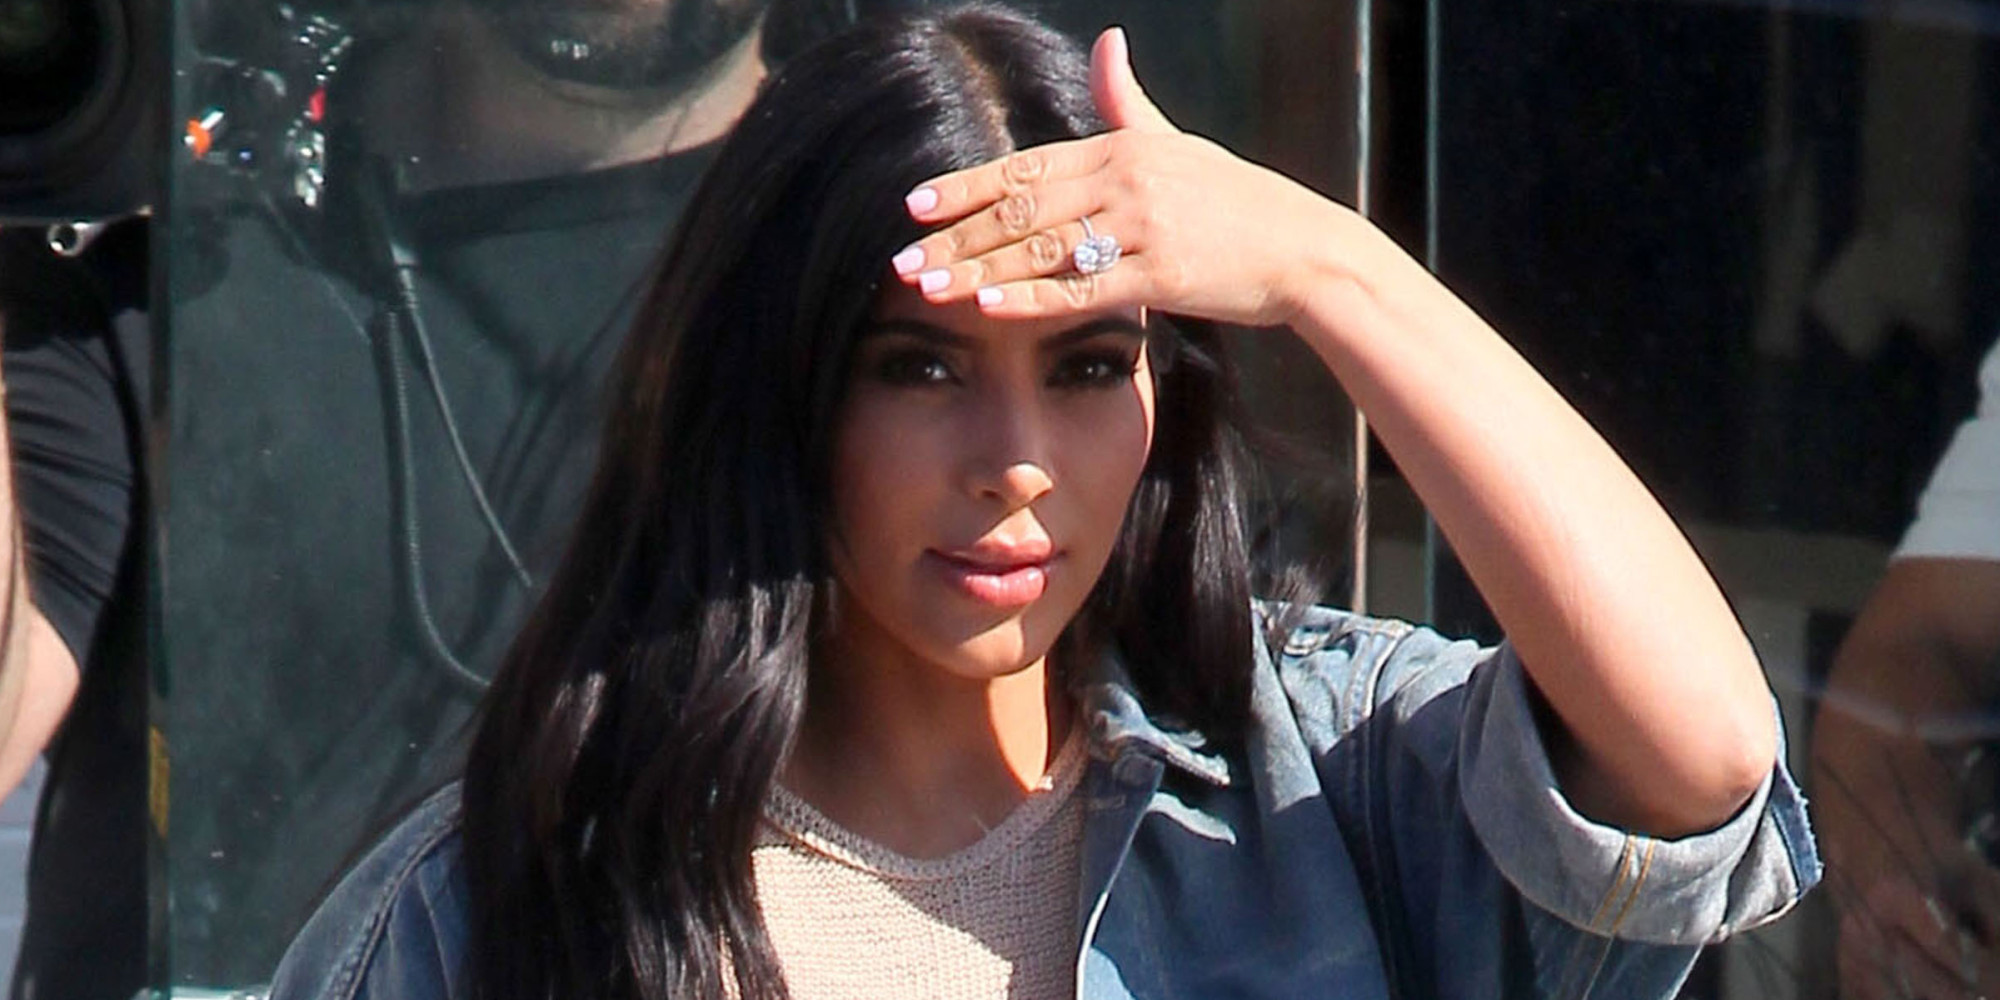 Pregnant Kim Kardashian Steps Out In A Crop Top | HuffPost